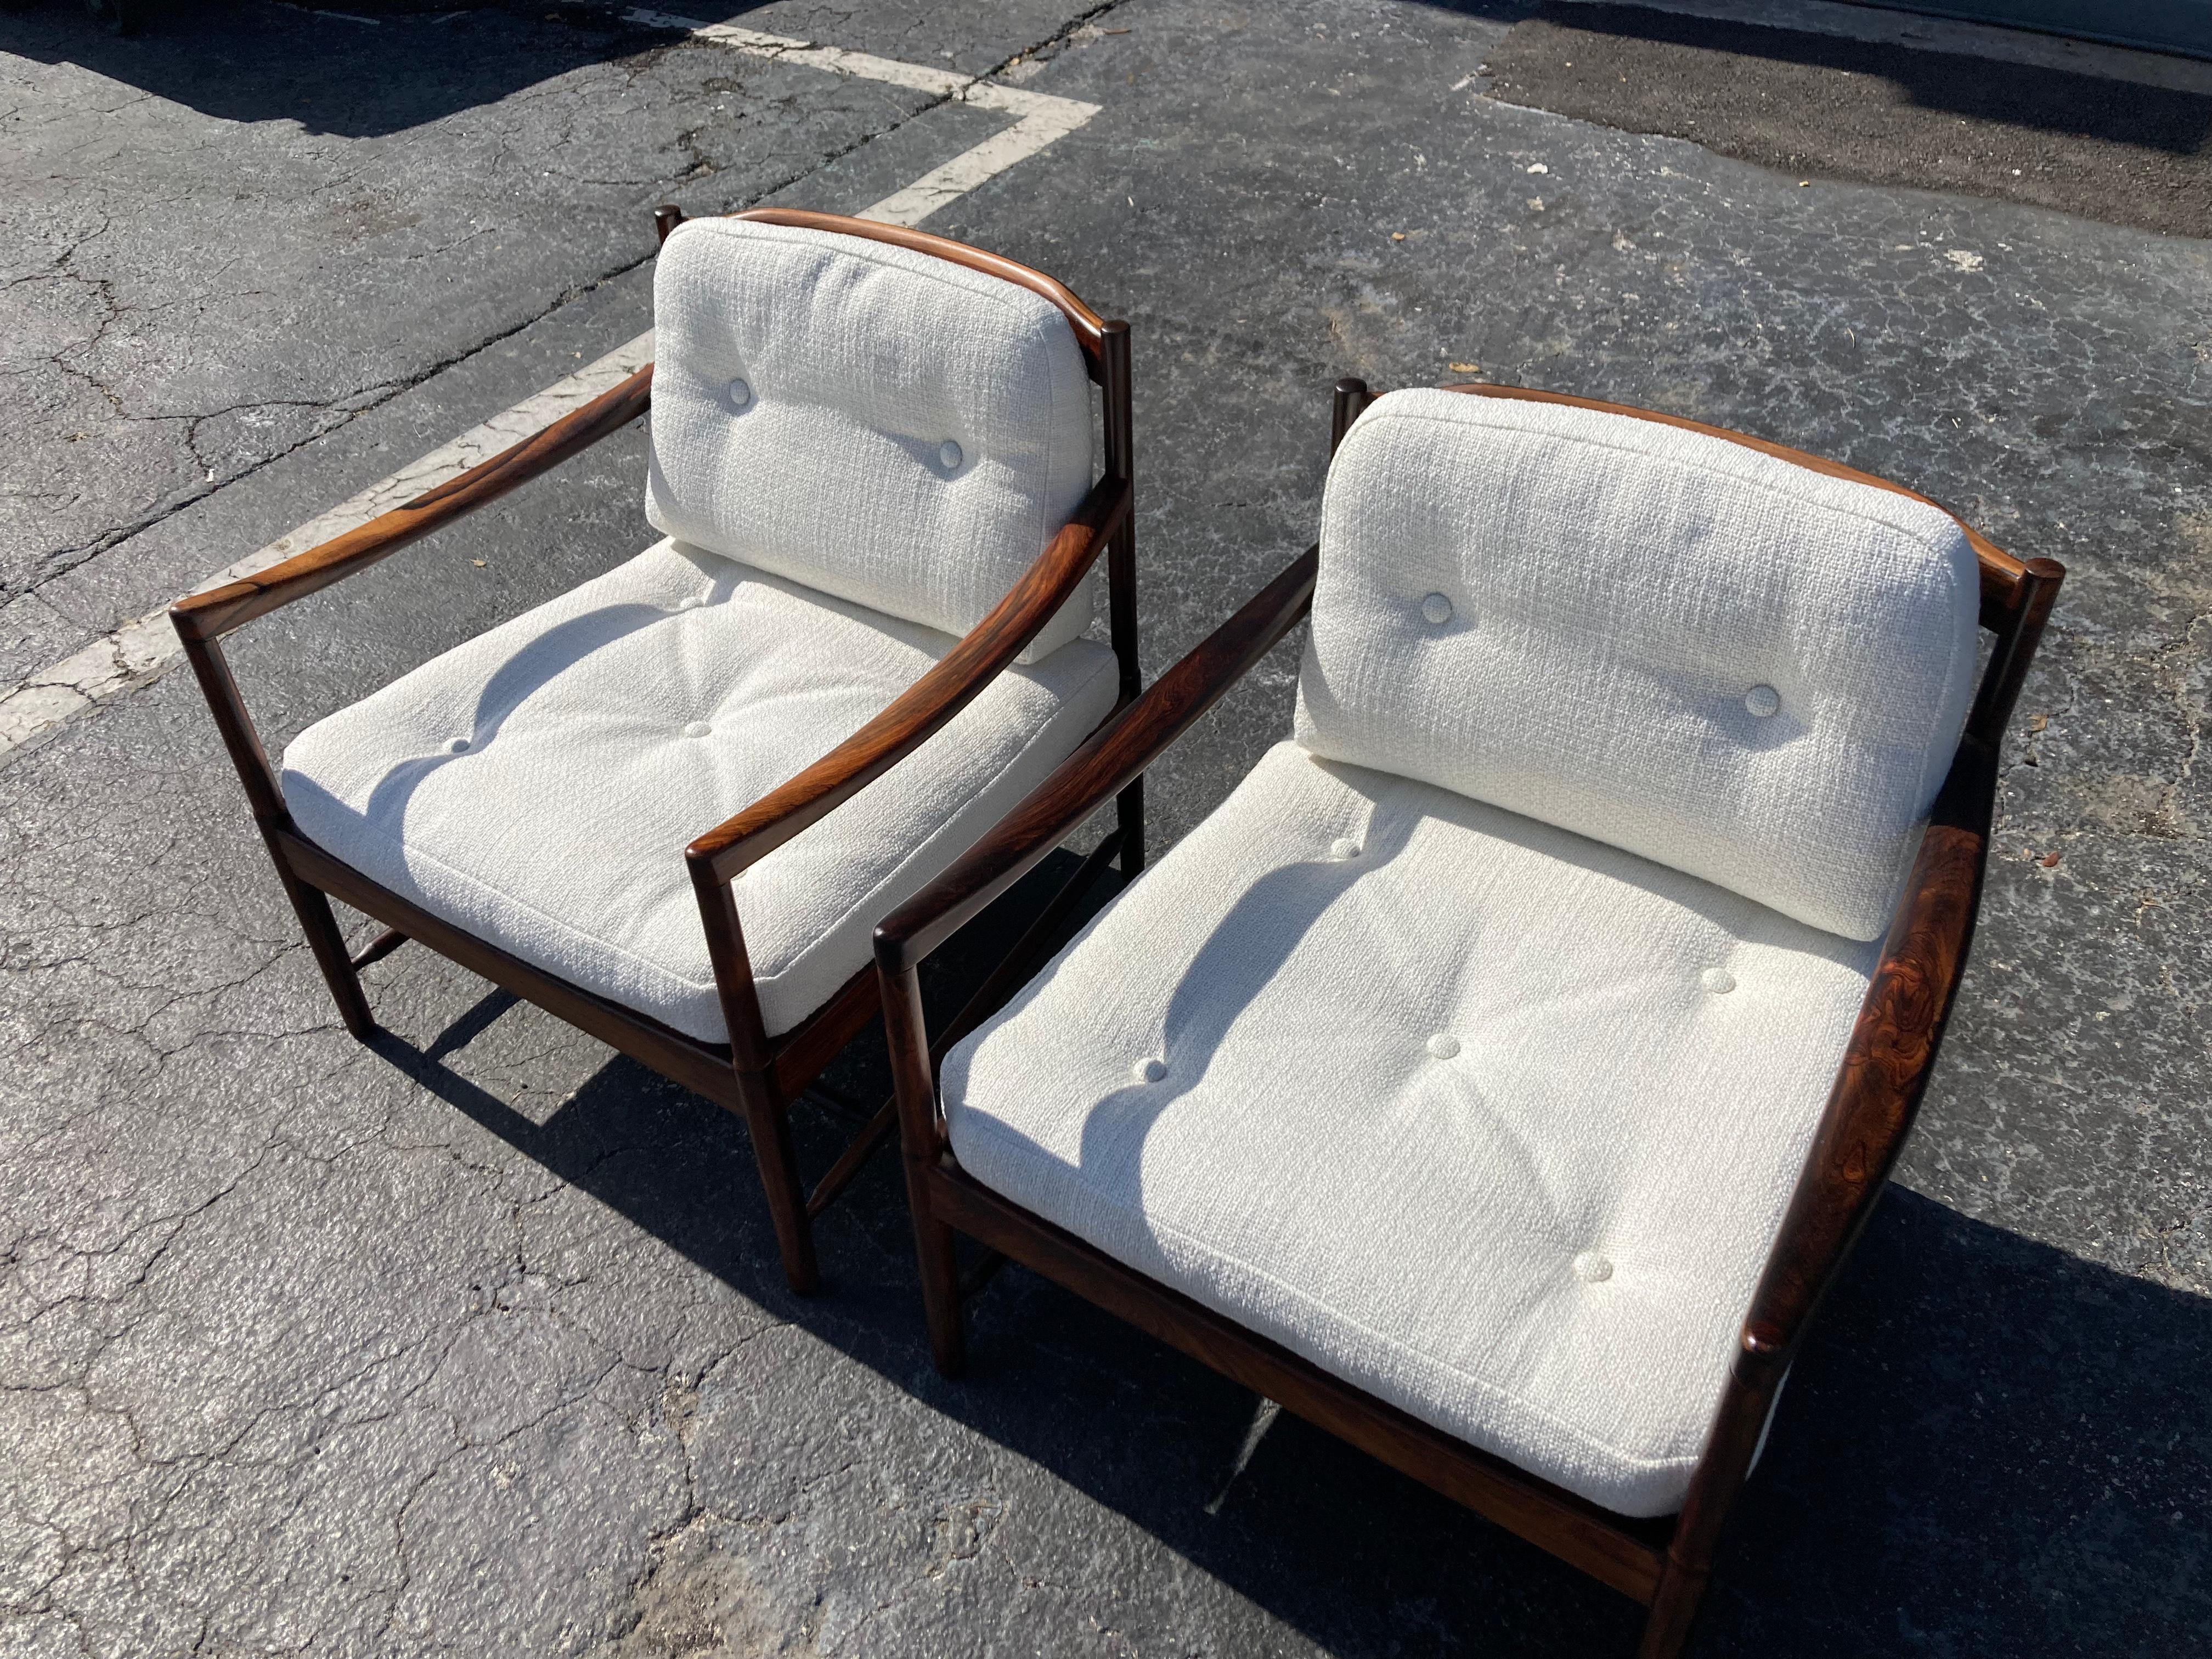 Mid-20th Century Pair of Rosewood Lounge Chairs Attributed to Kofod Larsen, Danish Modern For Sale